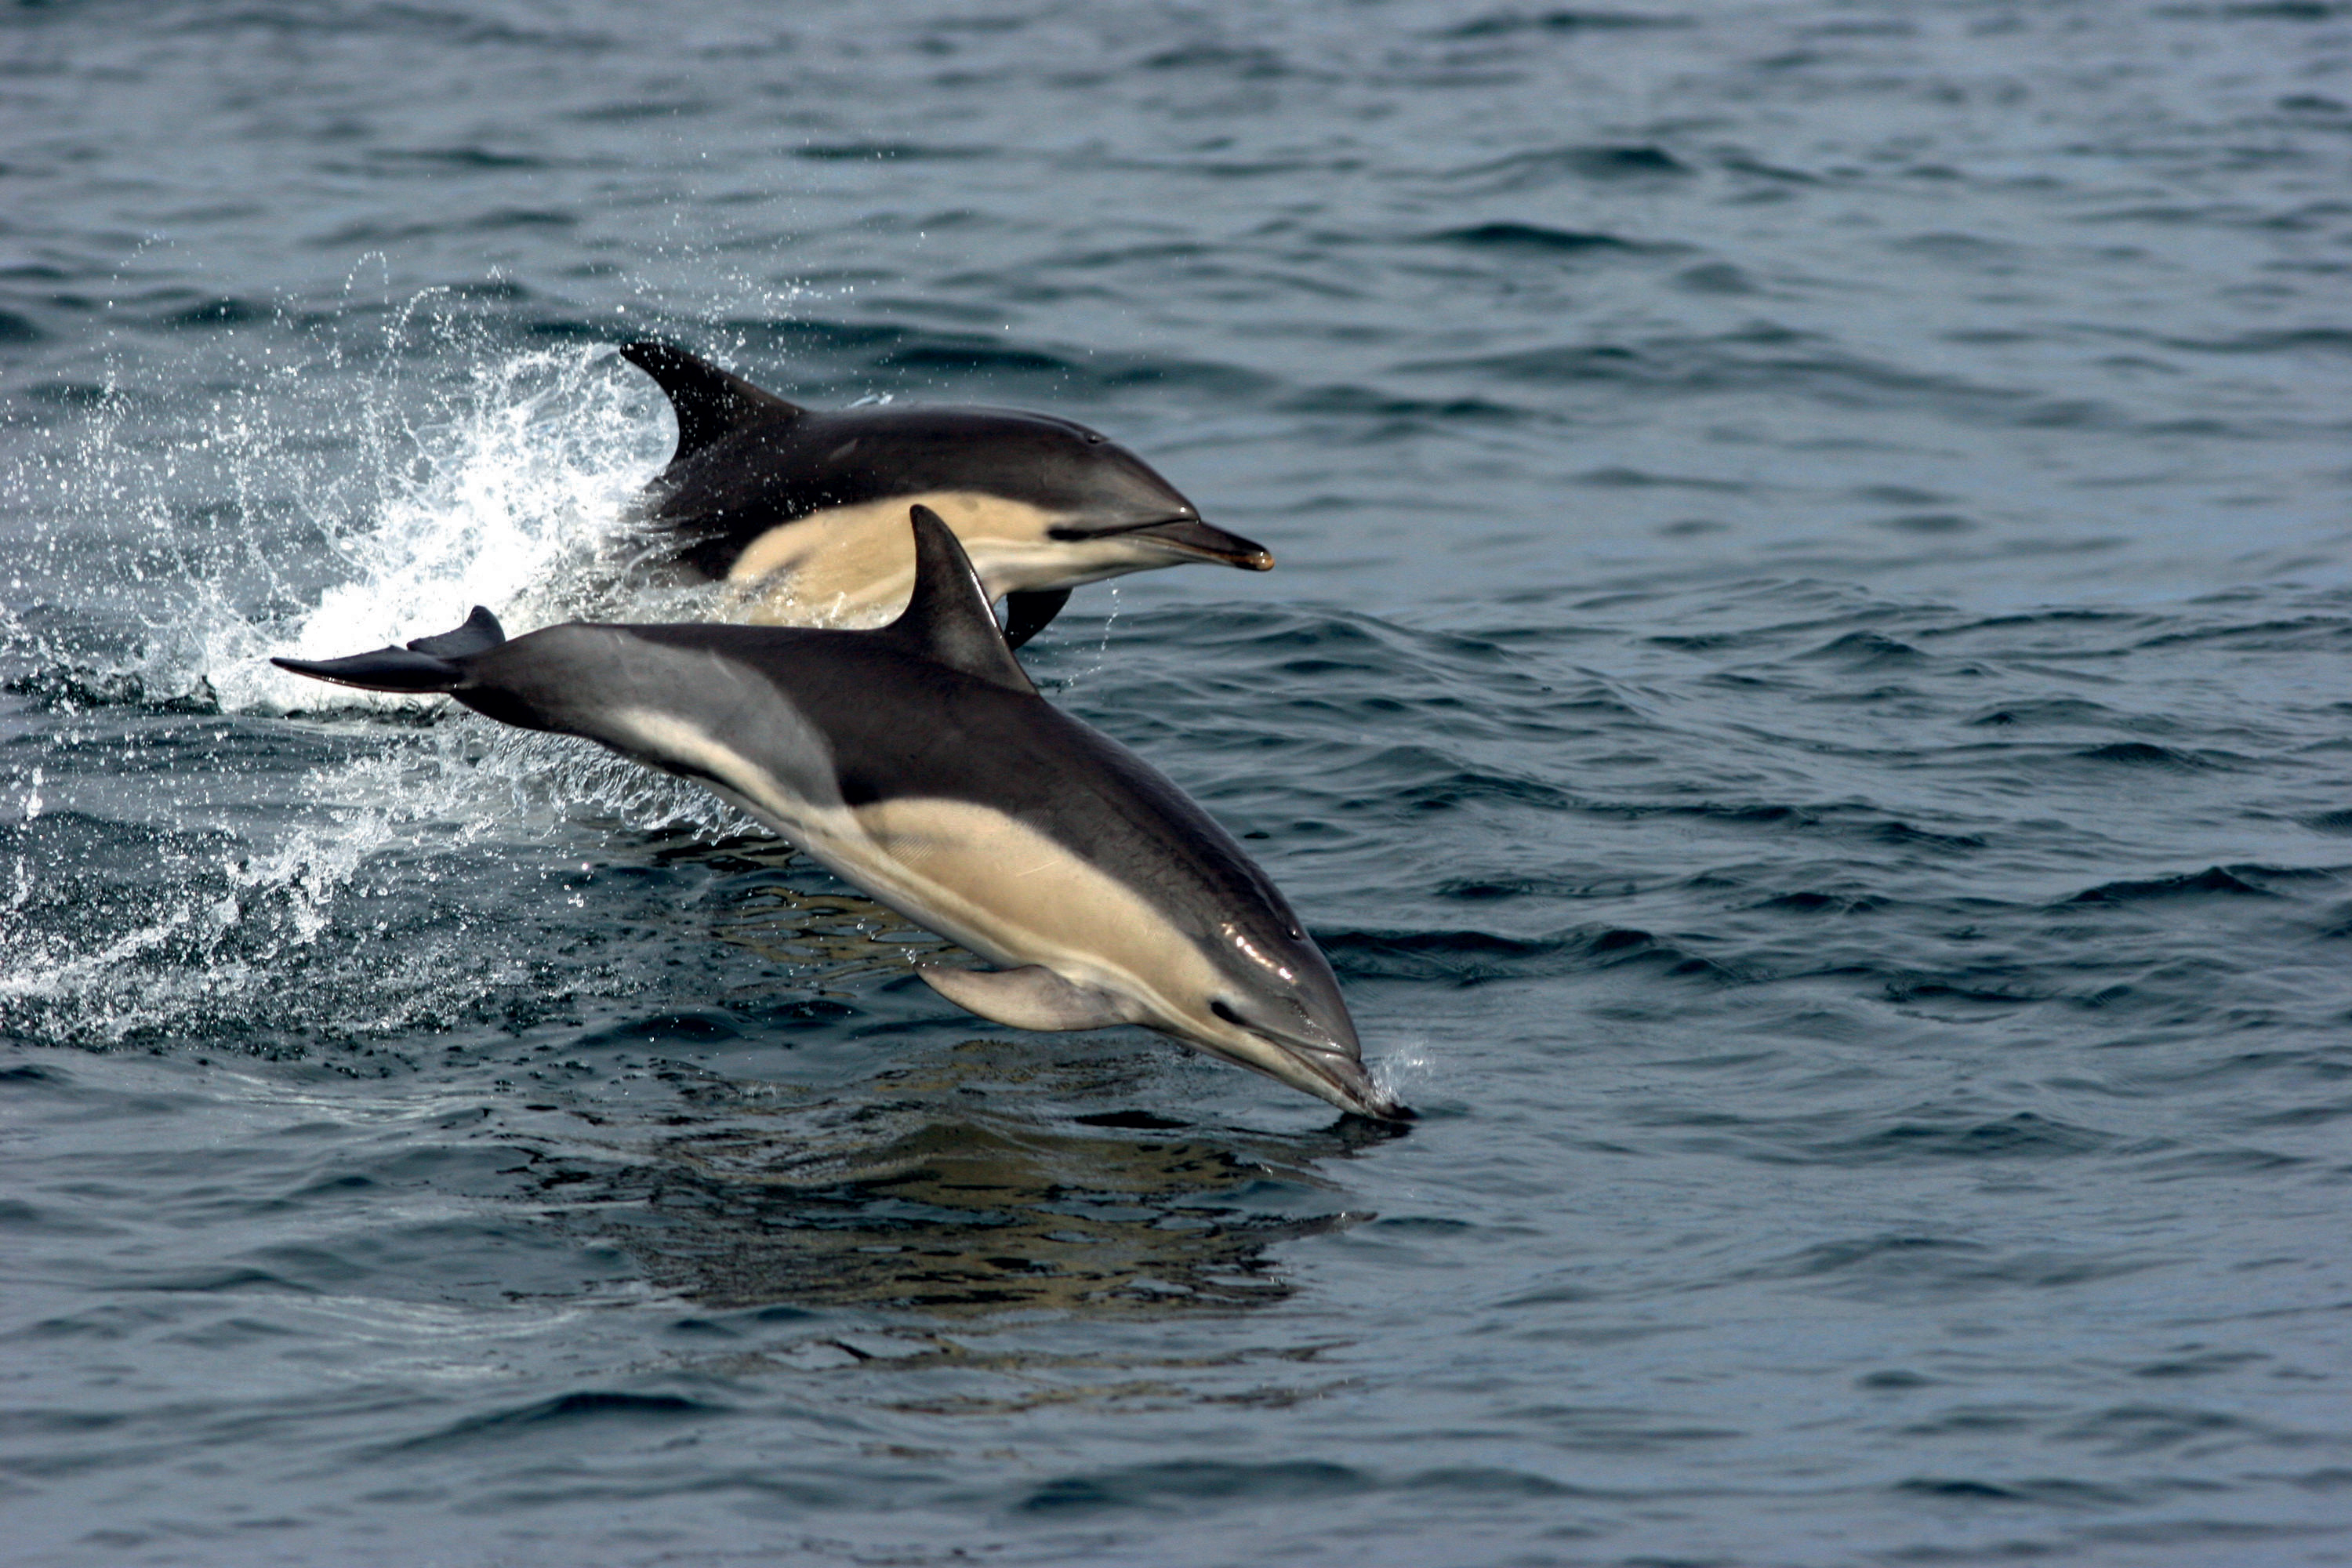 Scilly common Dolphins